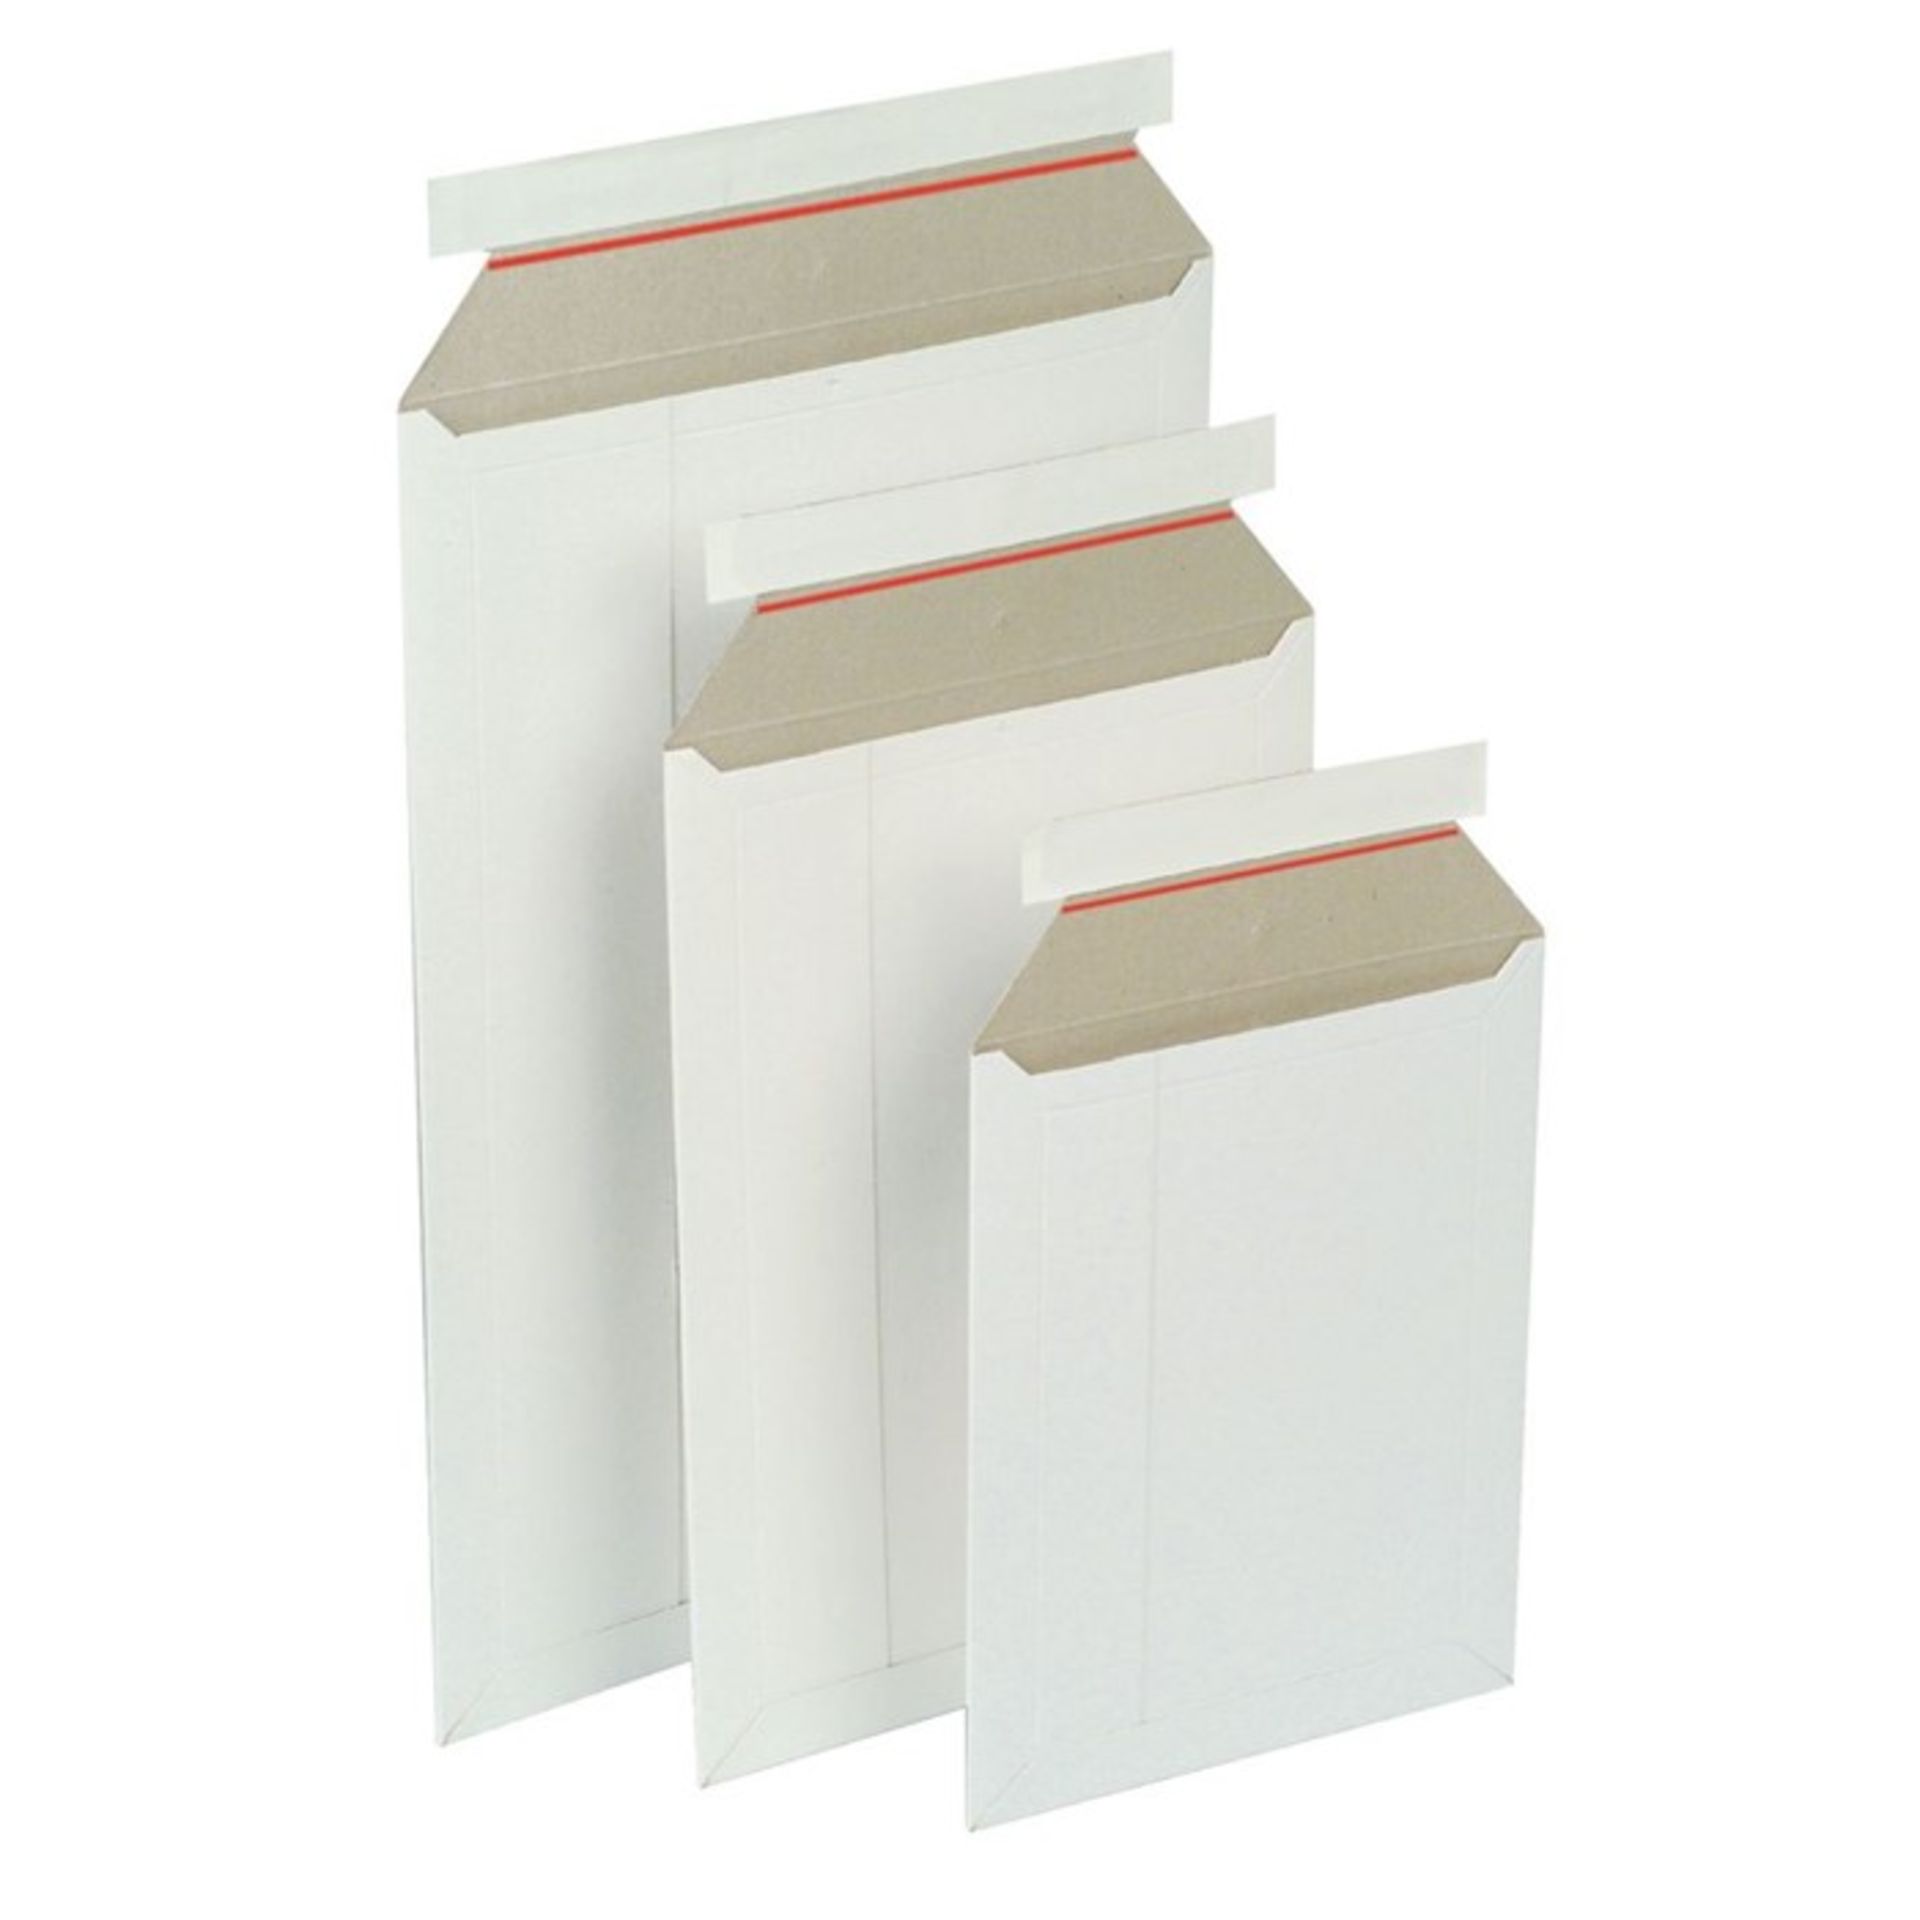 1 BOX OF PRESSEL CARTON ENVELOPES 170MM X 245MM, 100 IN A BOX / RRP £29.99 / PN 37 (VIEWING HIGHLY